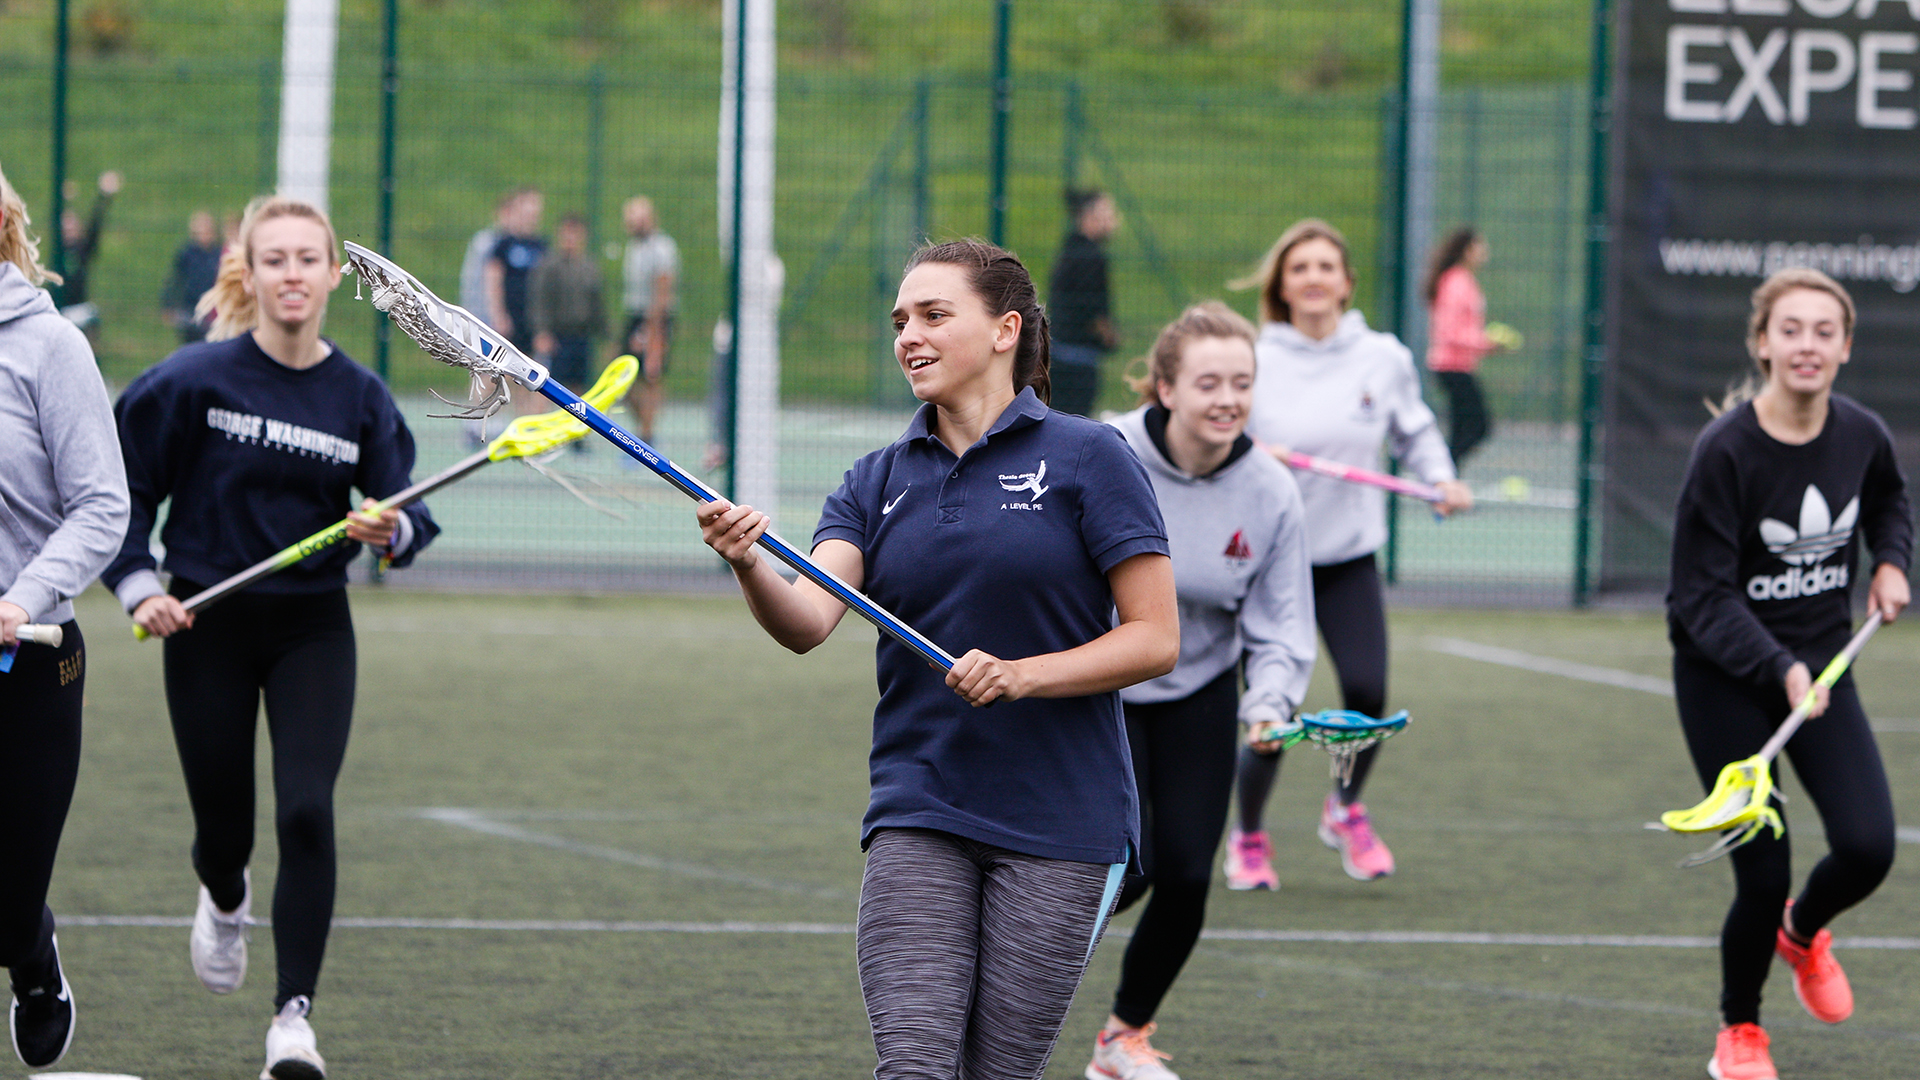 Group of female students running with Lacrosse sticks trying out Lacrosse sport